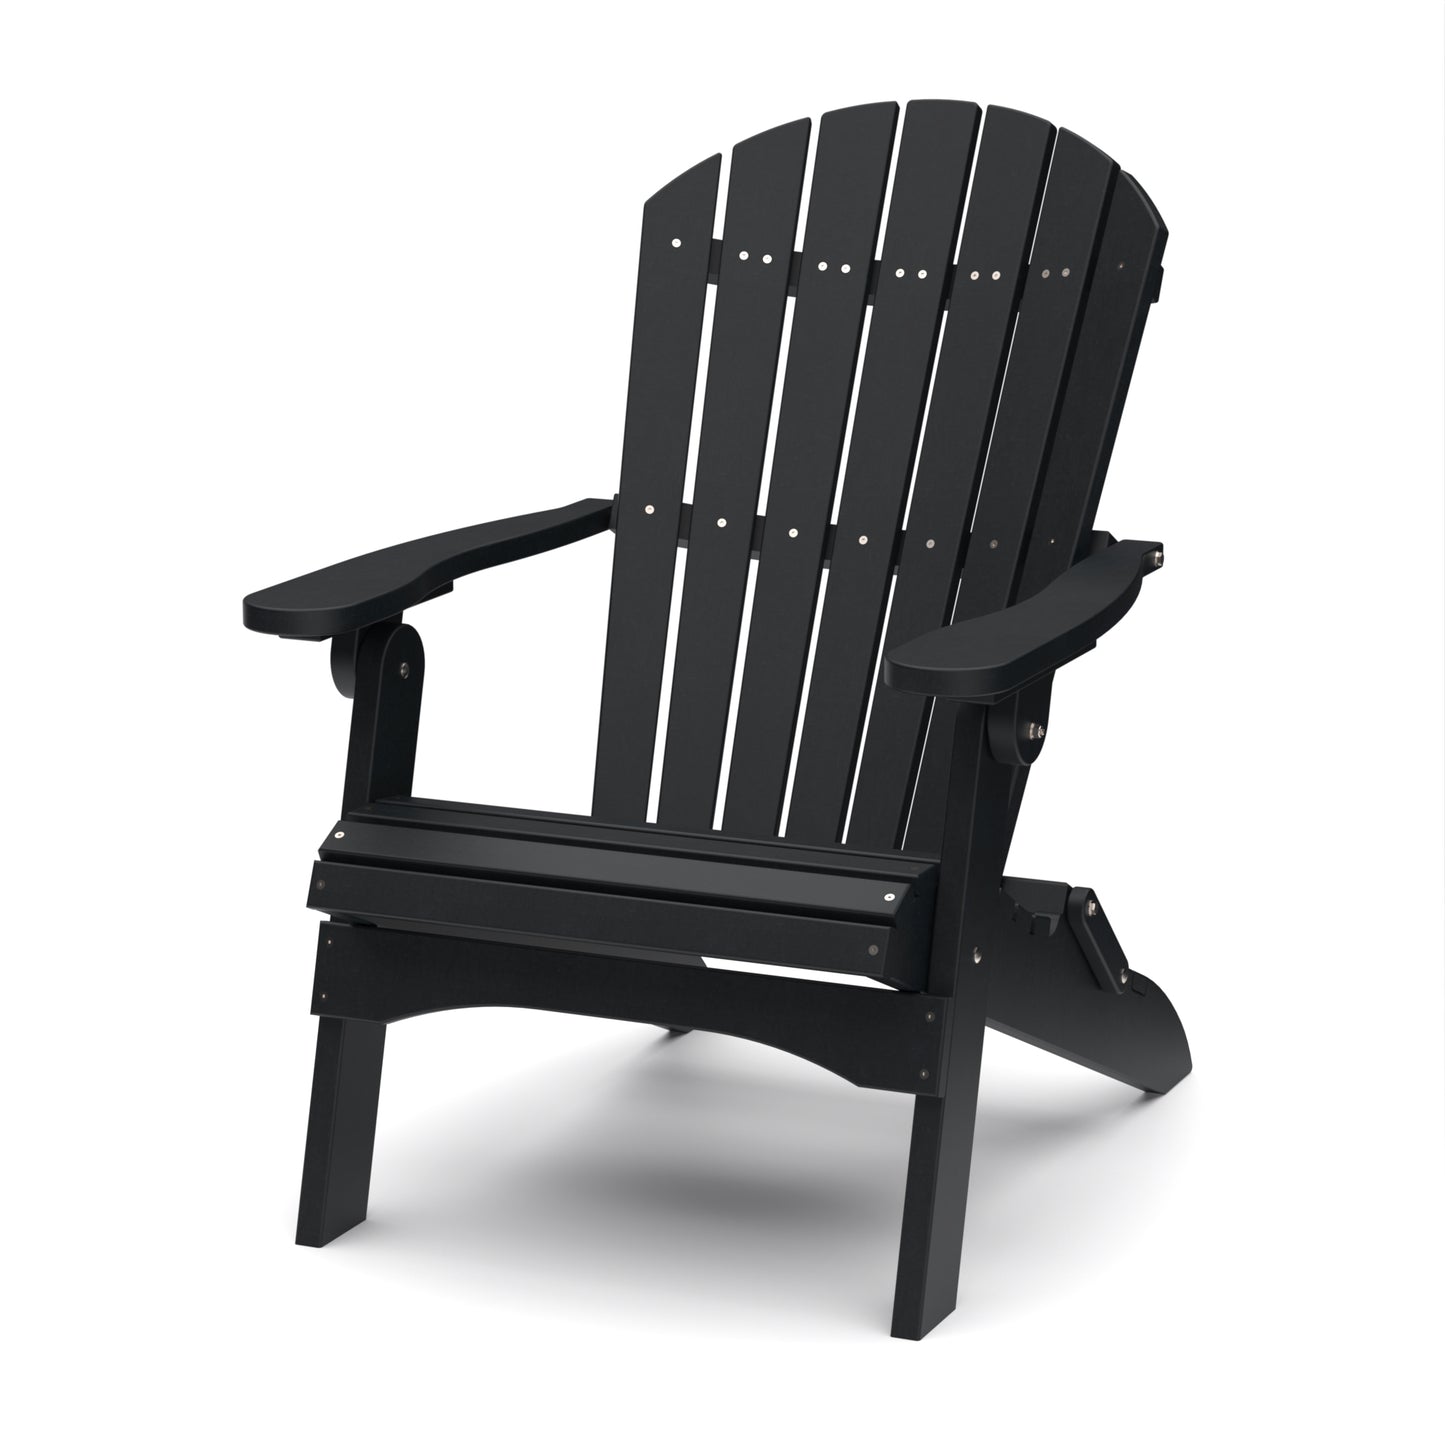 Wildridge Heritage Recycled Plastic Folding Adirondack Chair (QUICK SHIP) - LEAD TIME TO SHIP 3 TO 4 BUSINESS DAYS